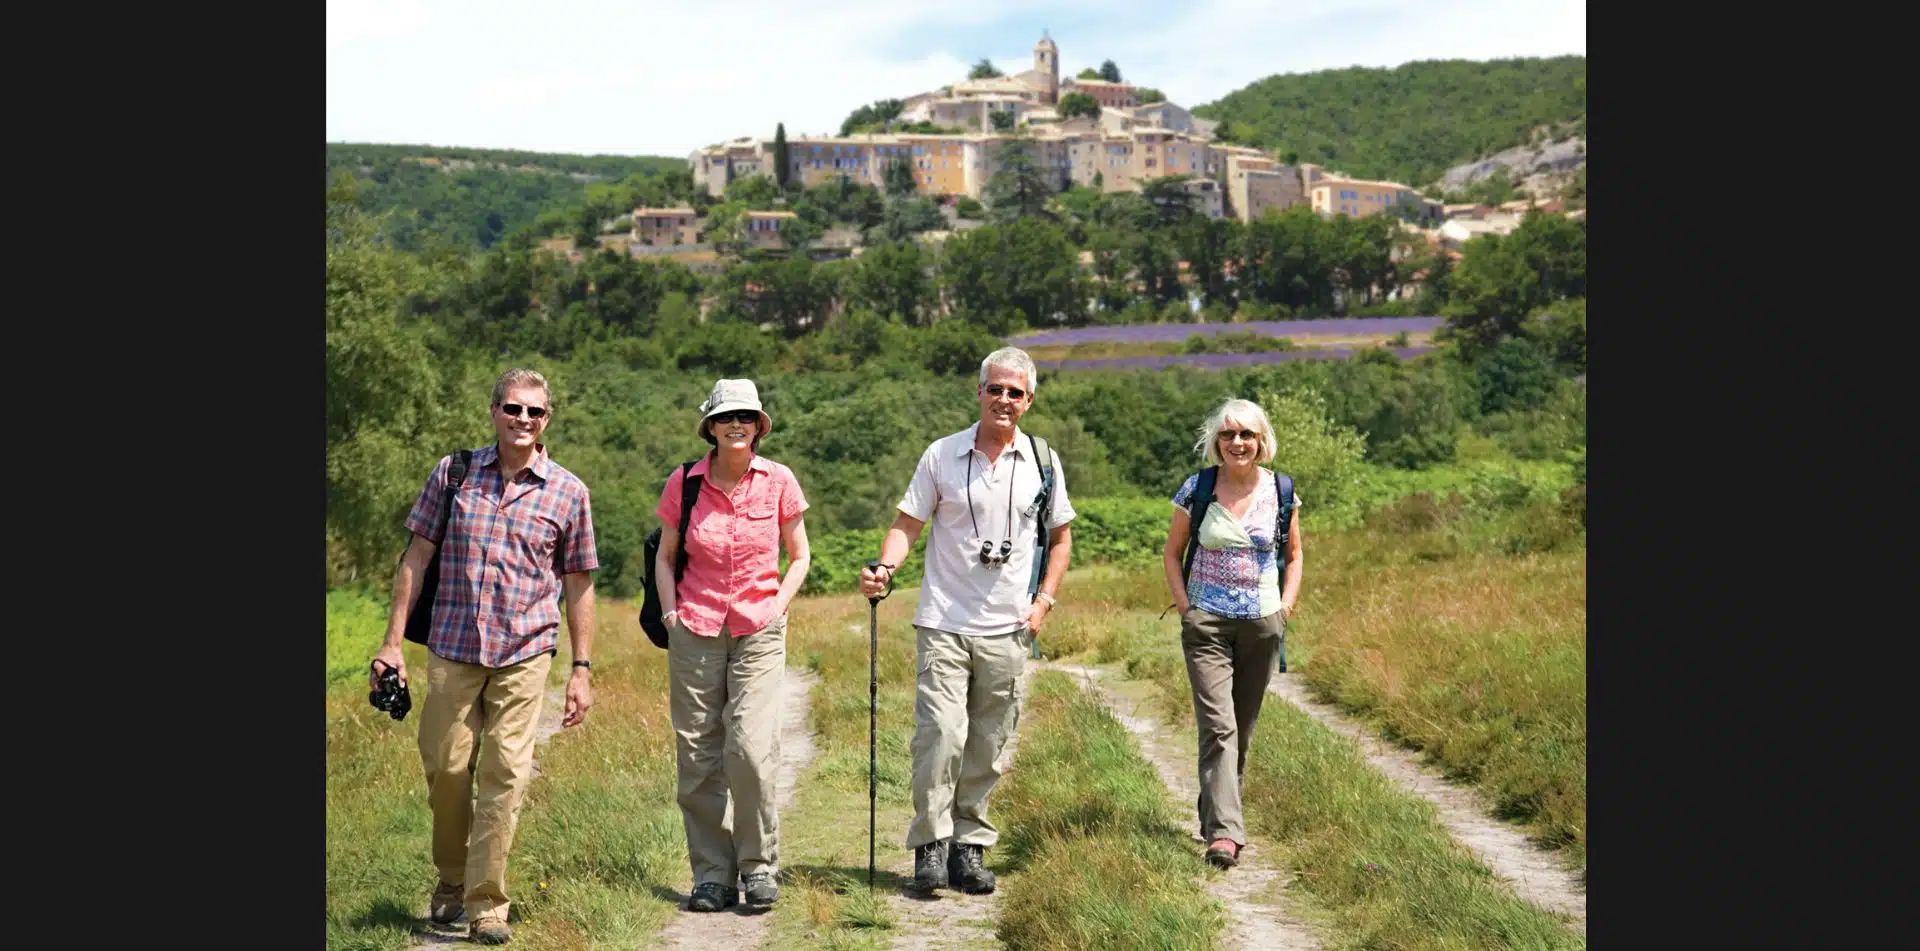 5 - Immerse yourself in Provence, one step at a time